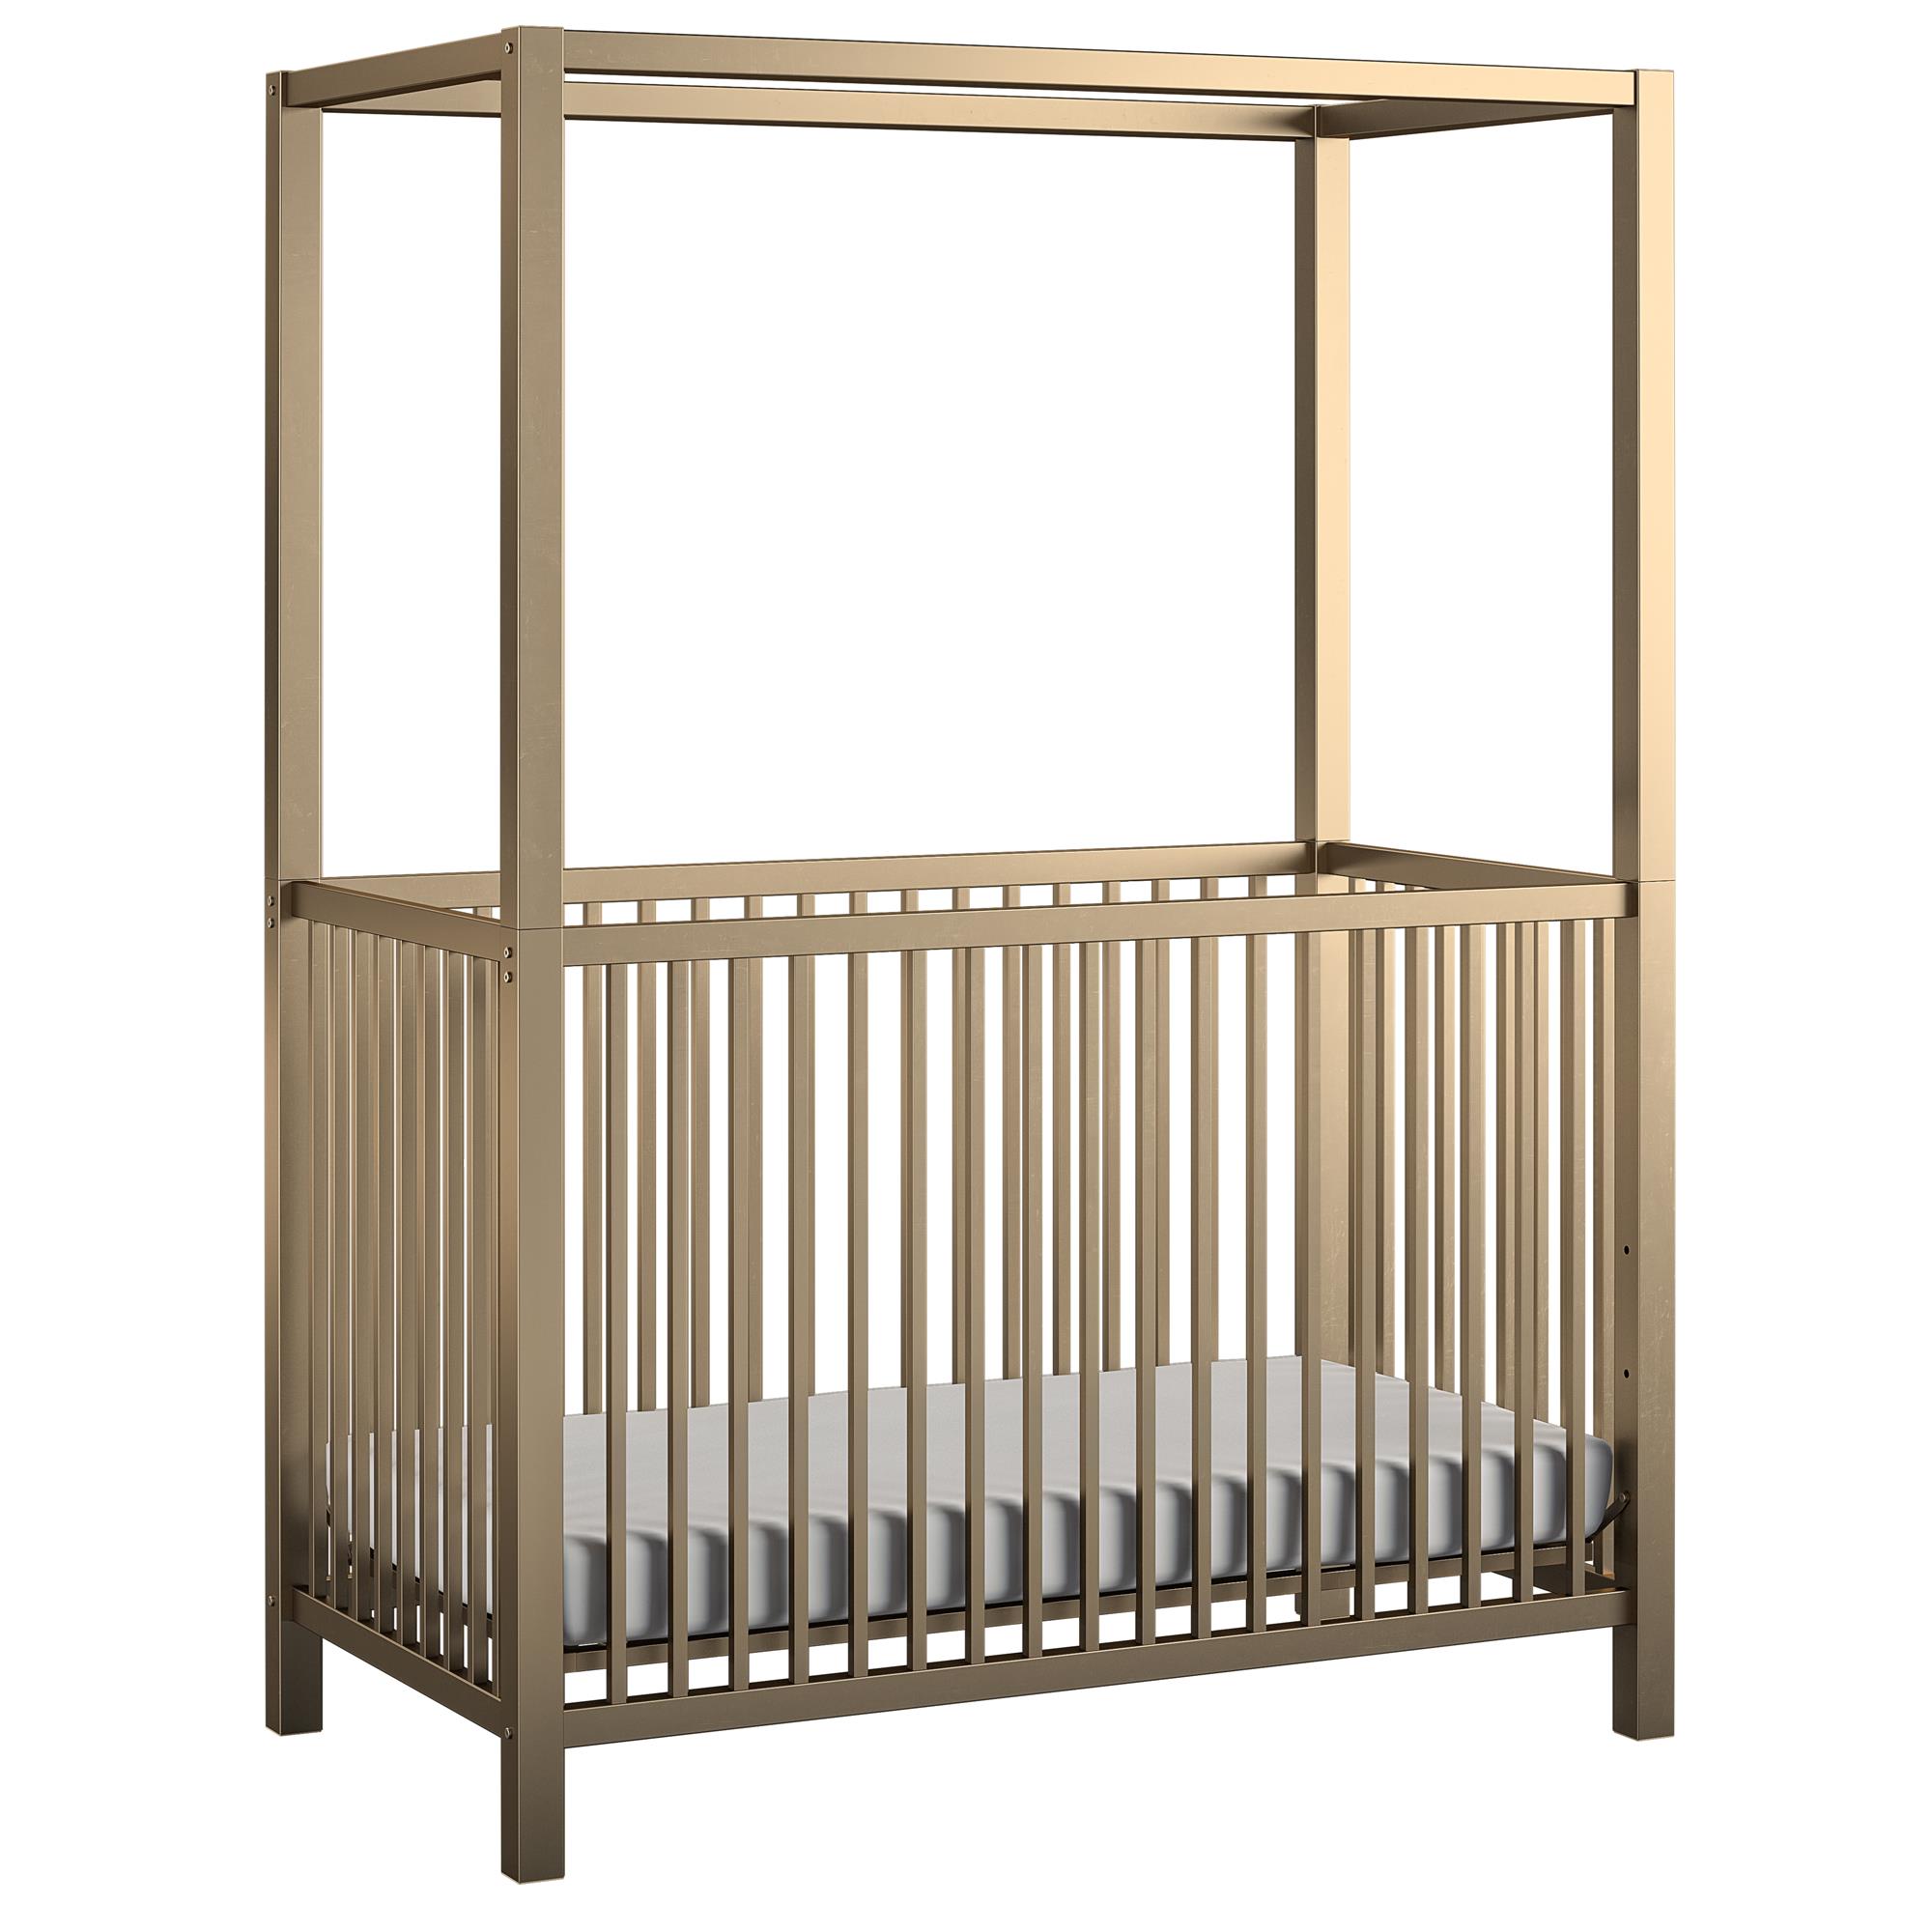 Little Seeds Monarch Hill Haven Gold Metal Canopy Crib - image 5 of 16